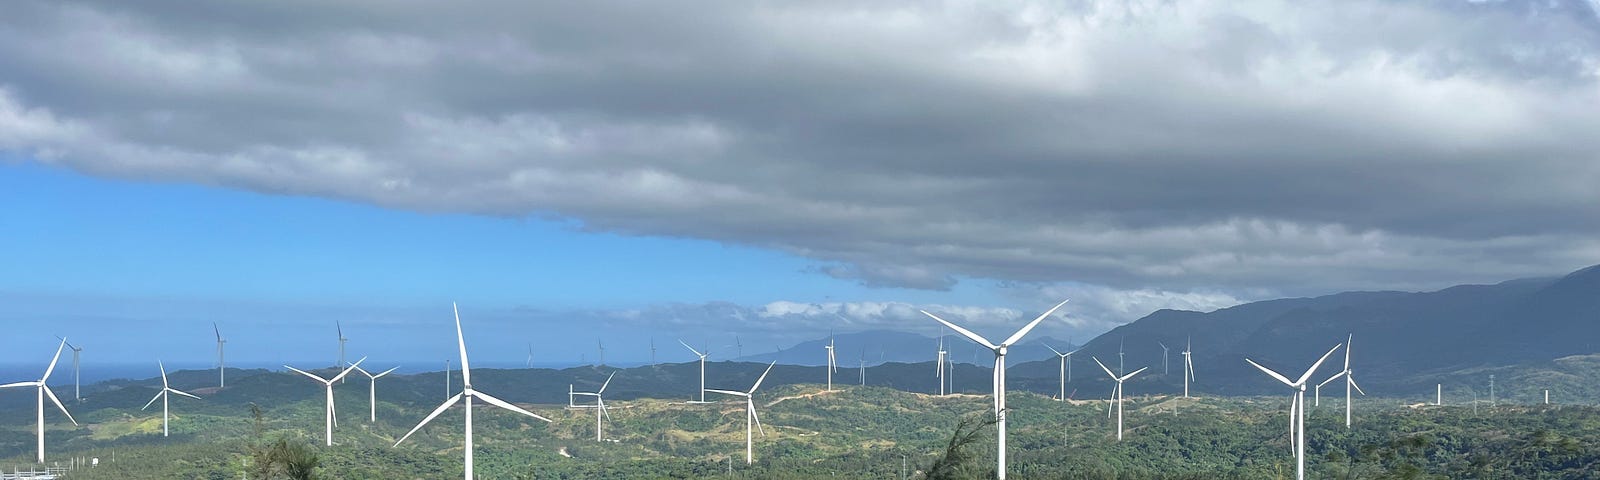 A series of windmills in a forest with mountains in the far distance.